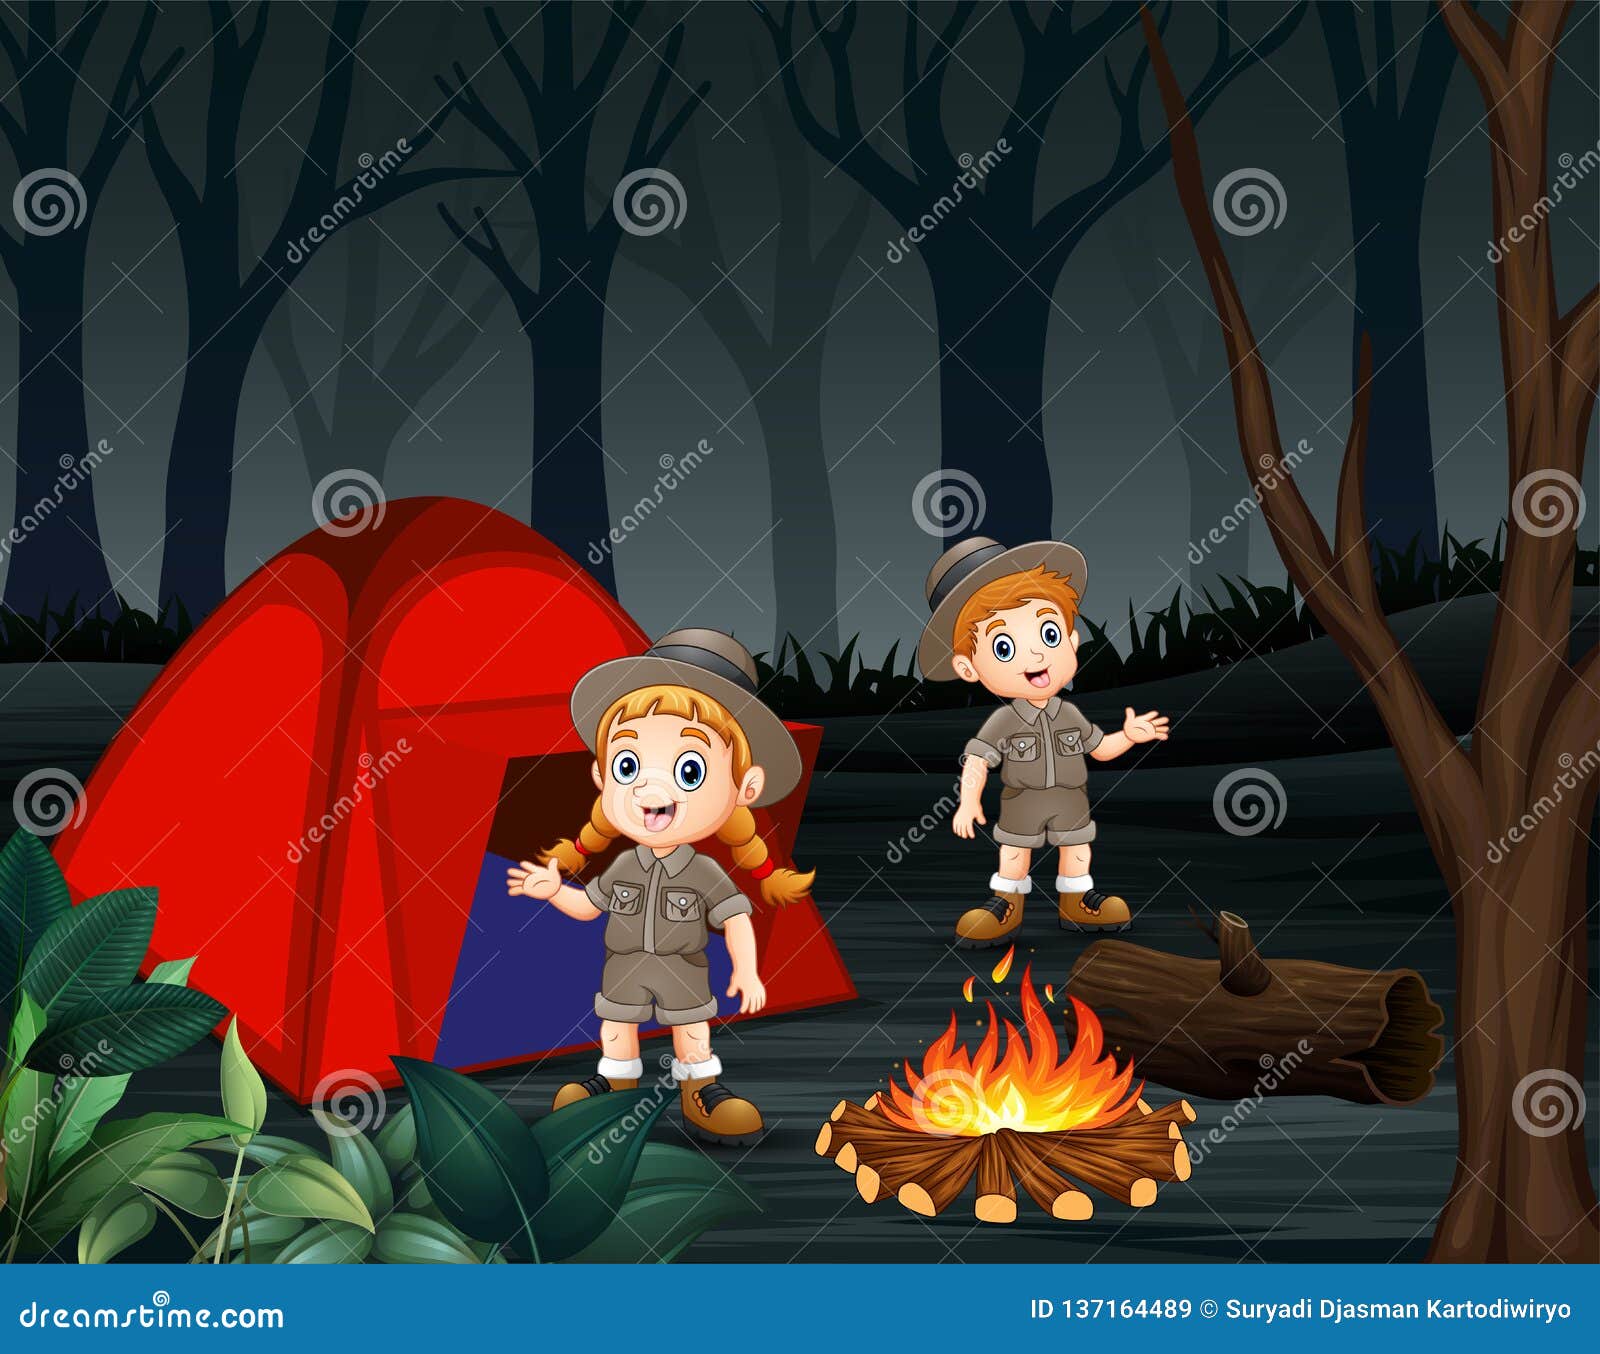 Cartoon Of Two Zookeepers Are Camping In A Dark Forest Stock Vector ... Girl Cartoon Zoo Keeper